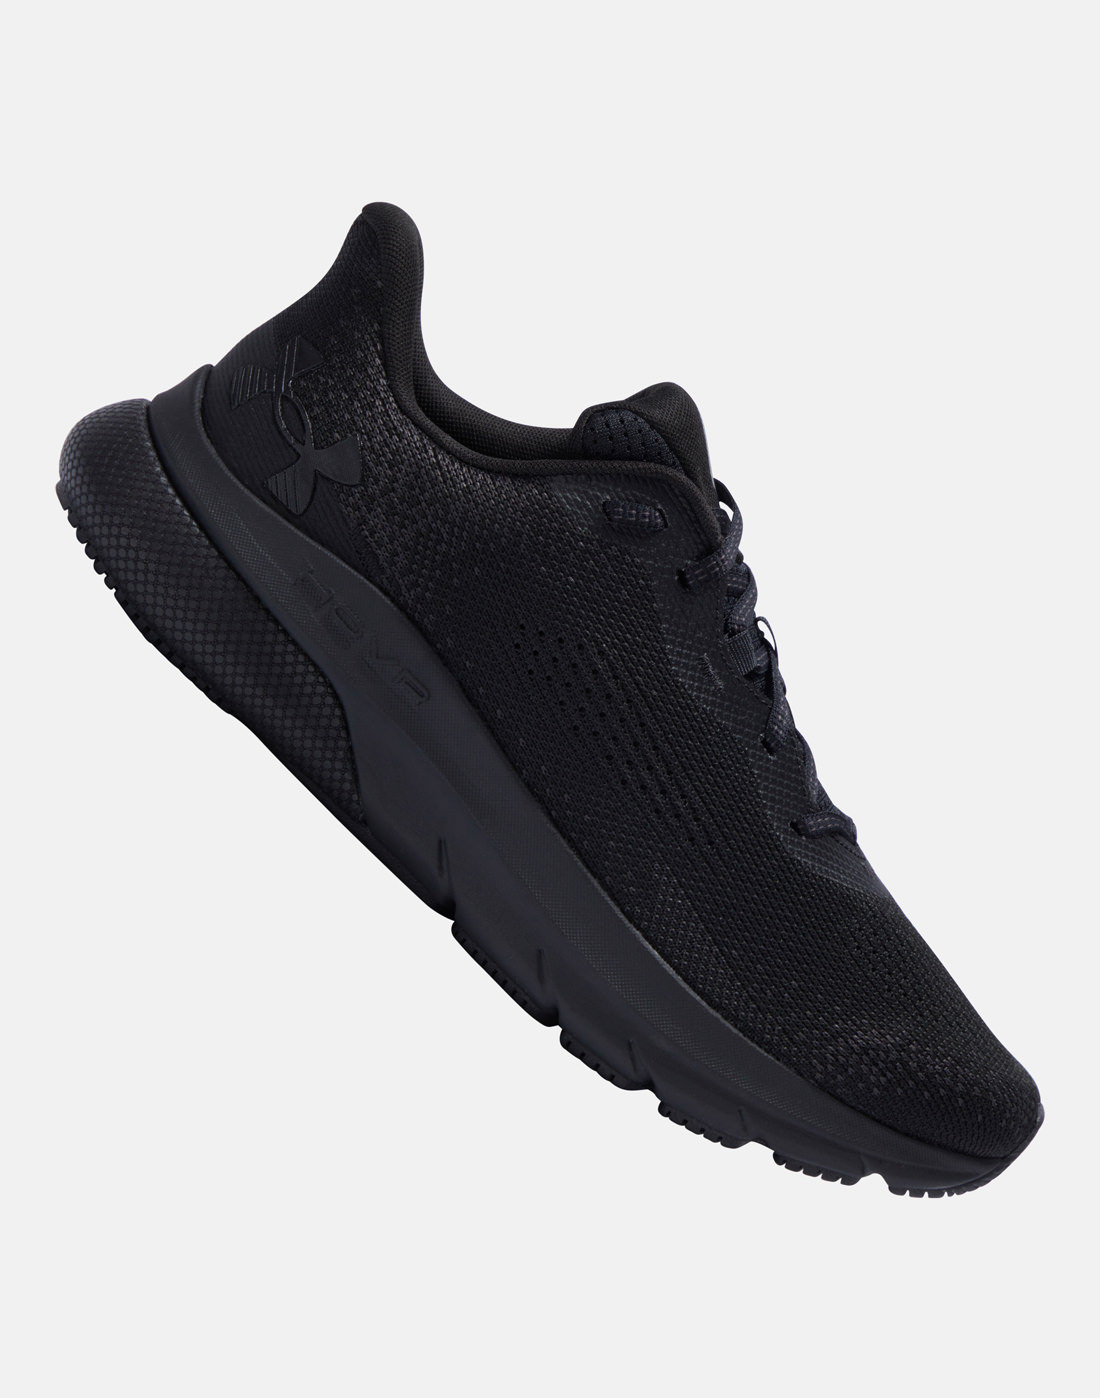 Under Armour Mens HOVR Turbulence 2 - Black | Life Style Sports IE